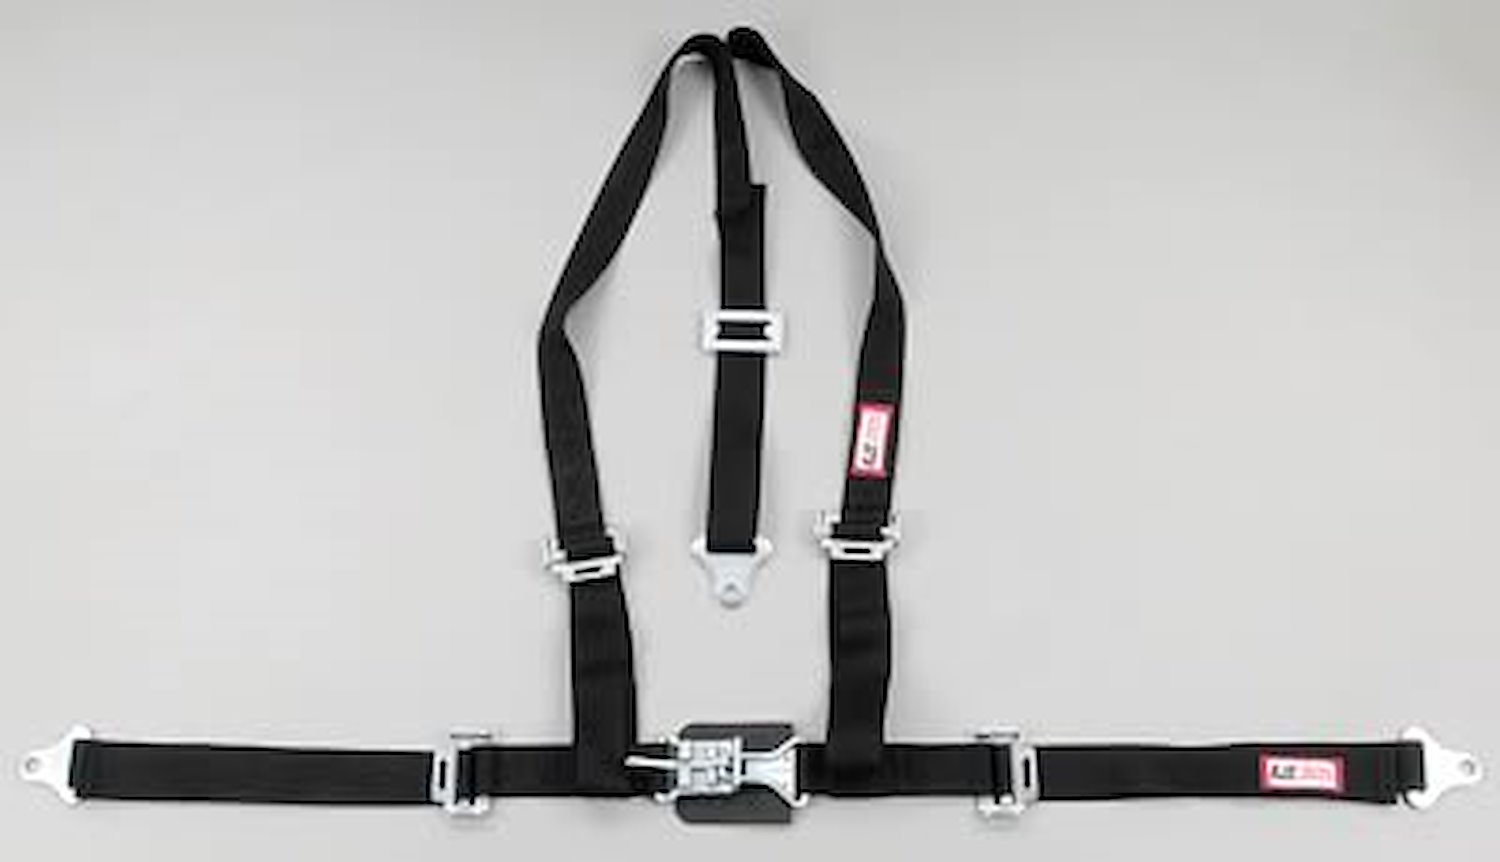 NON-SFI L&L HARNESS 3 PULL DOWN Lap Belt SNAP SEWN IN 2 S.H. Individual ROLL BAR Mount w/STERNUM STRAP WRAP/BOLT RED